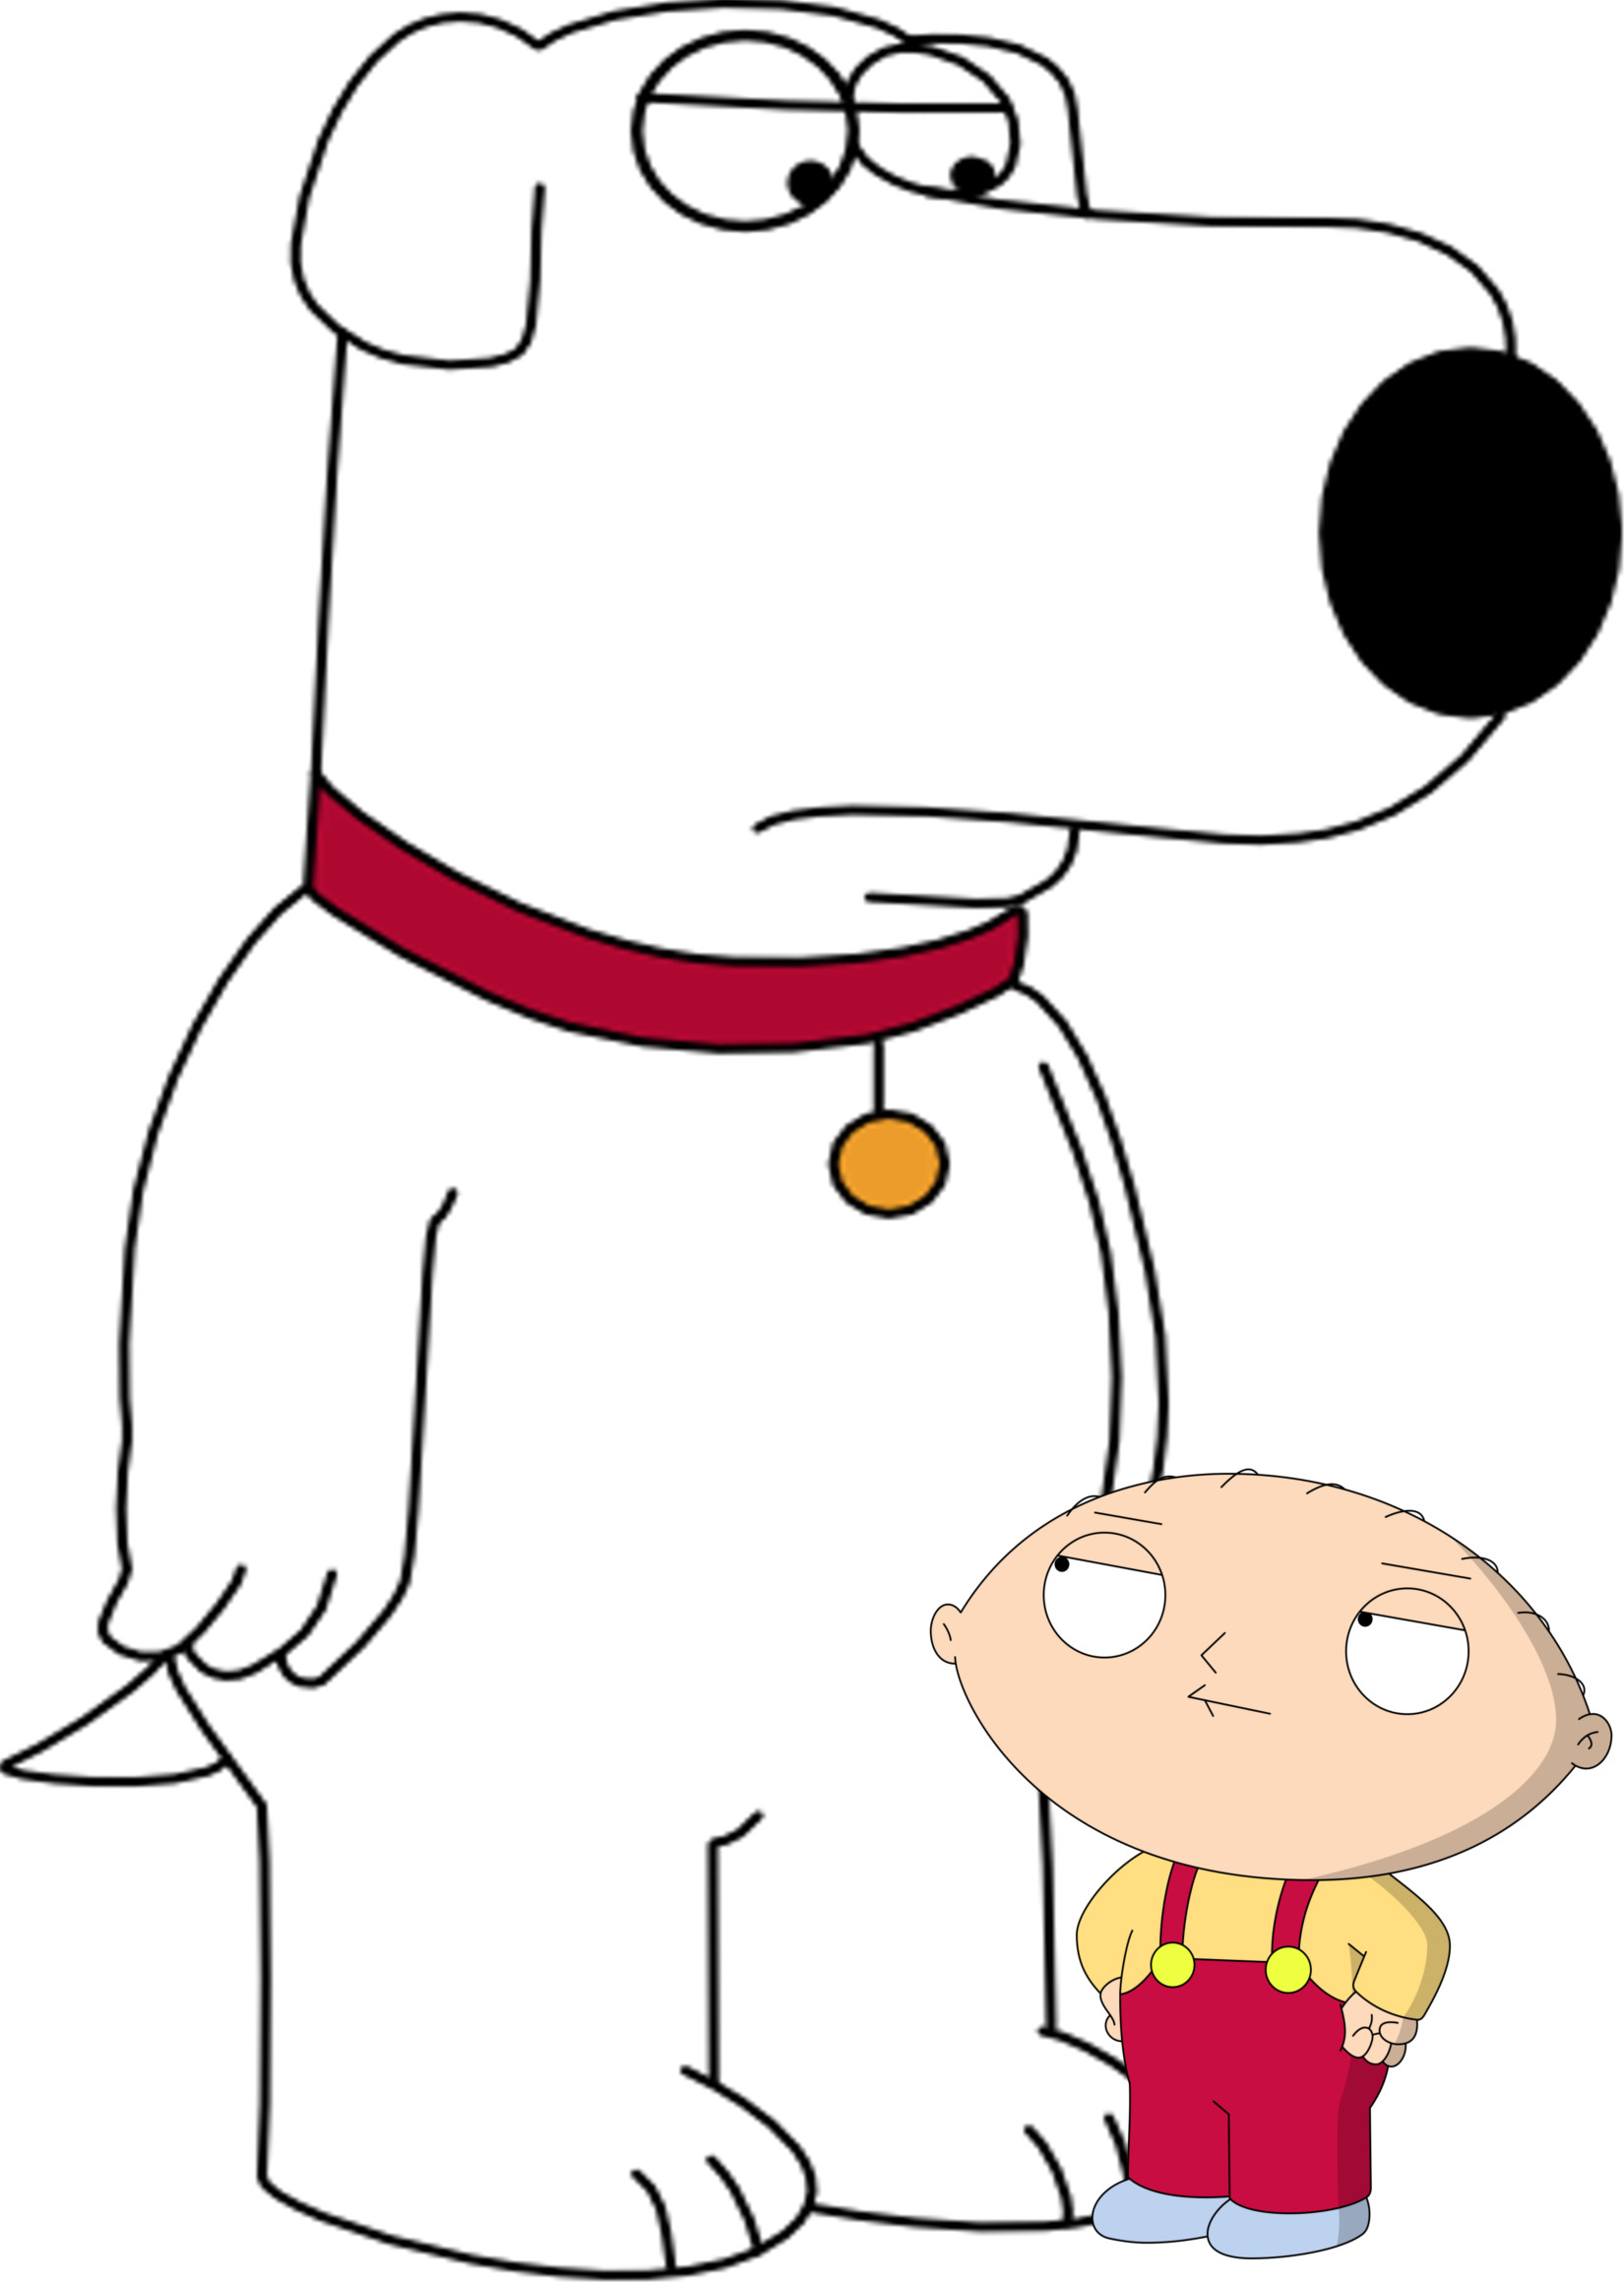 1650x2319 Brian And Stewie griffin by BradSnoopy97 Brian And Stewie griffin by  BradSnoopy97